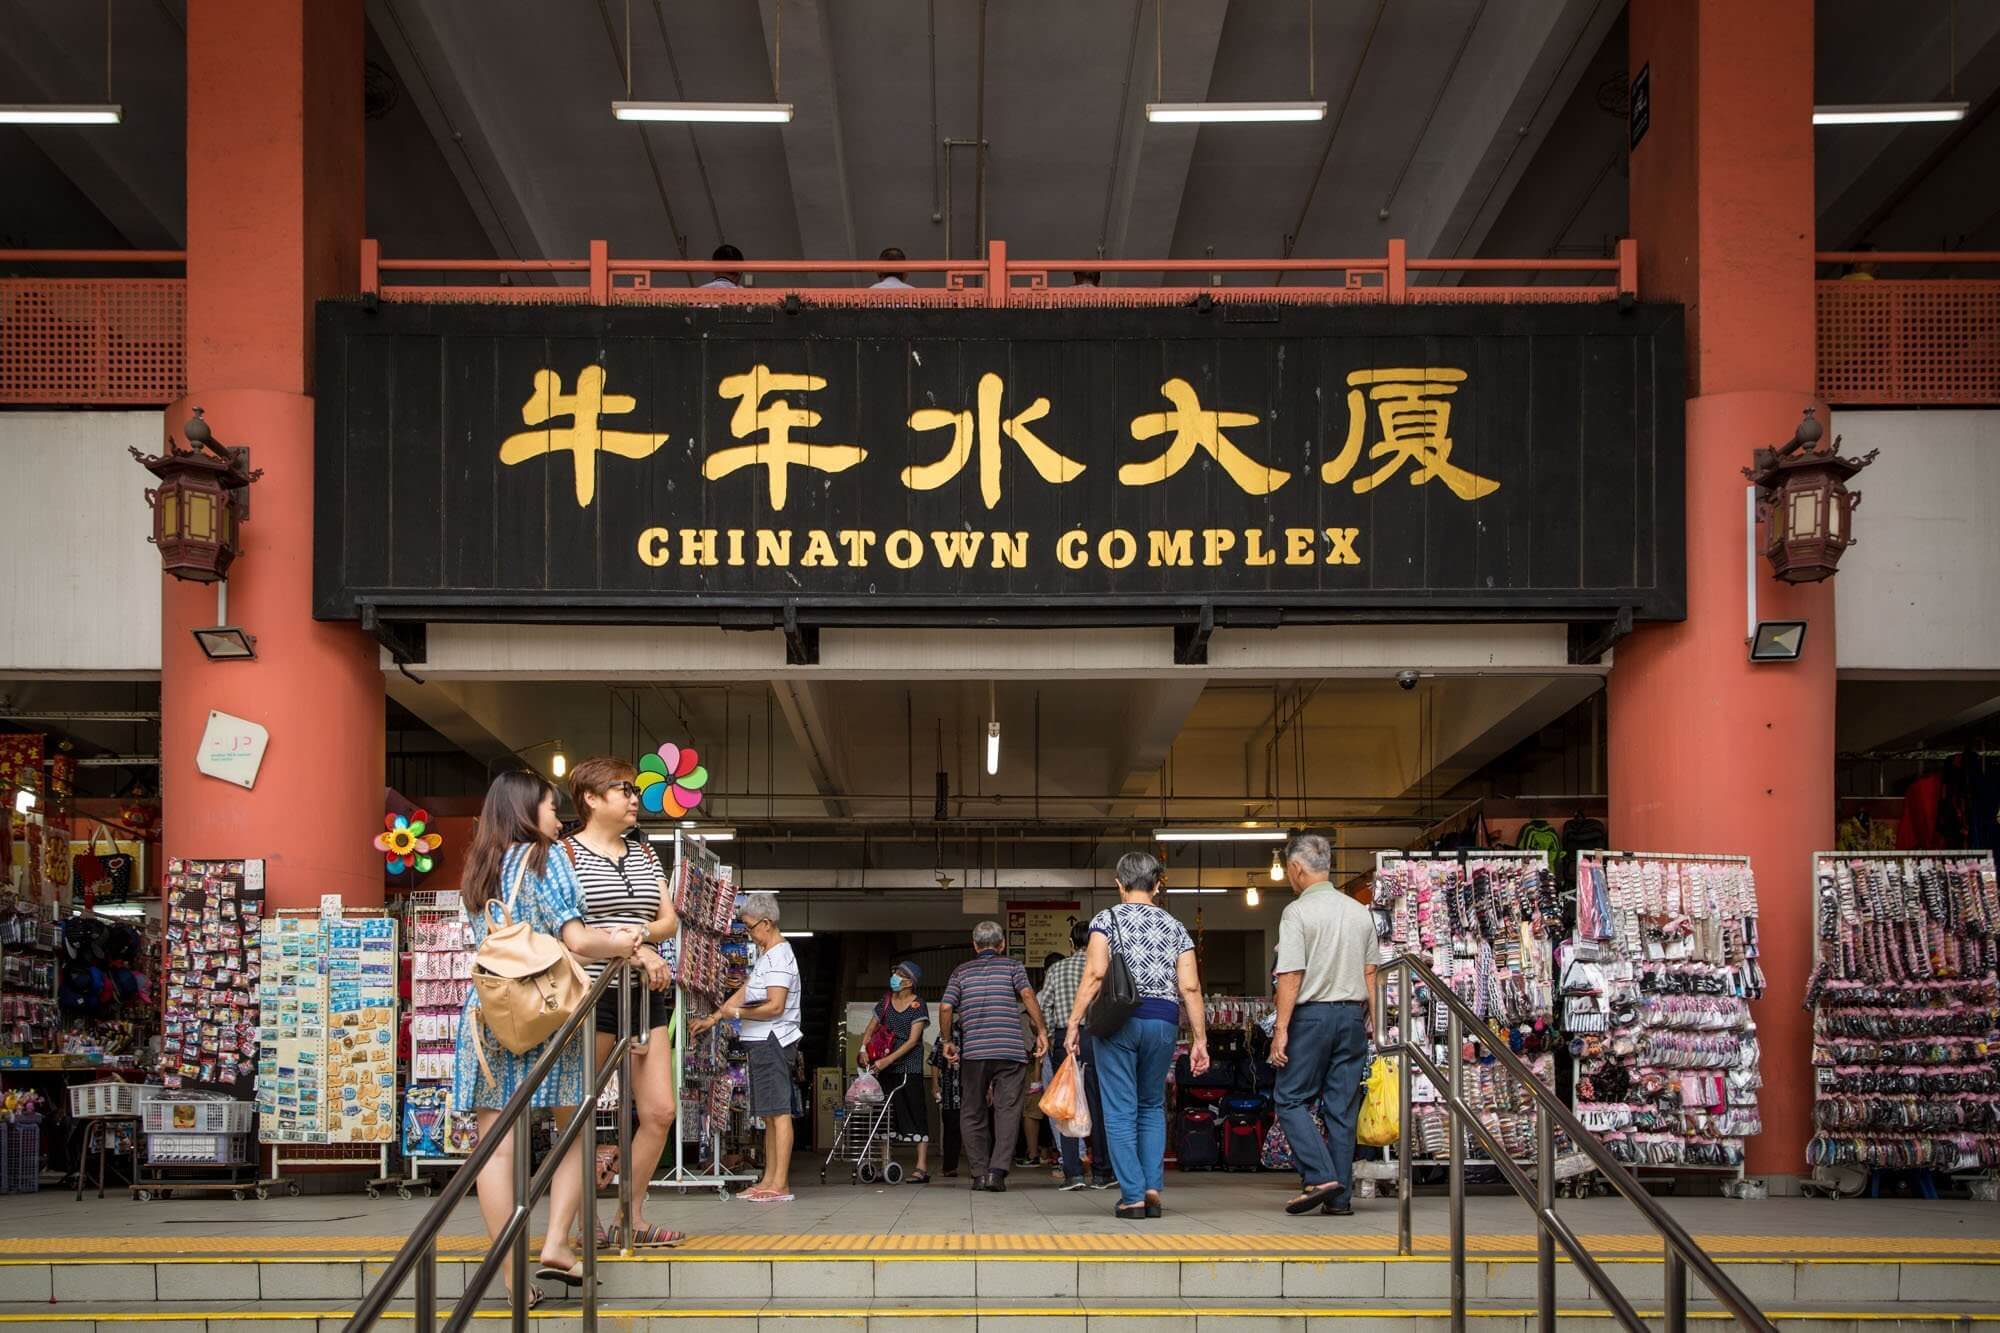 The Chinatown Complex in Singapore's Chinatown